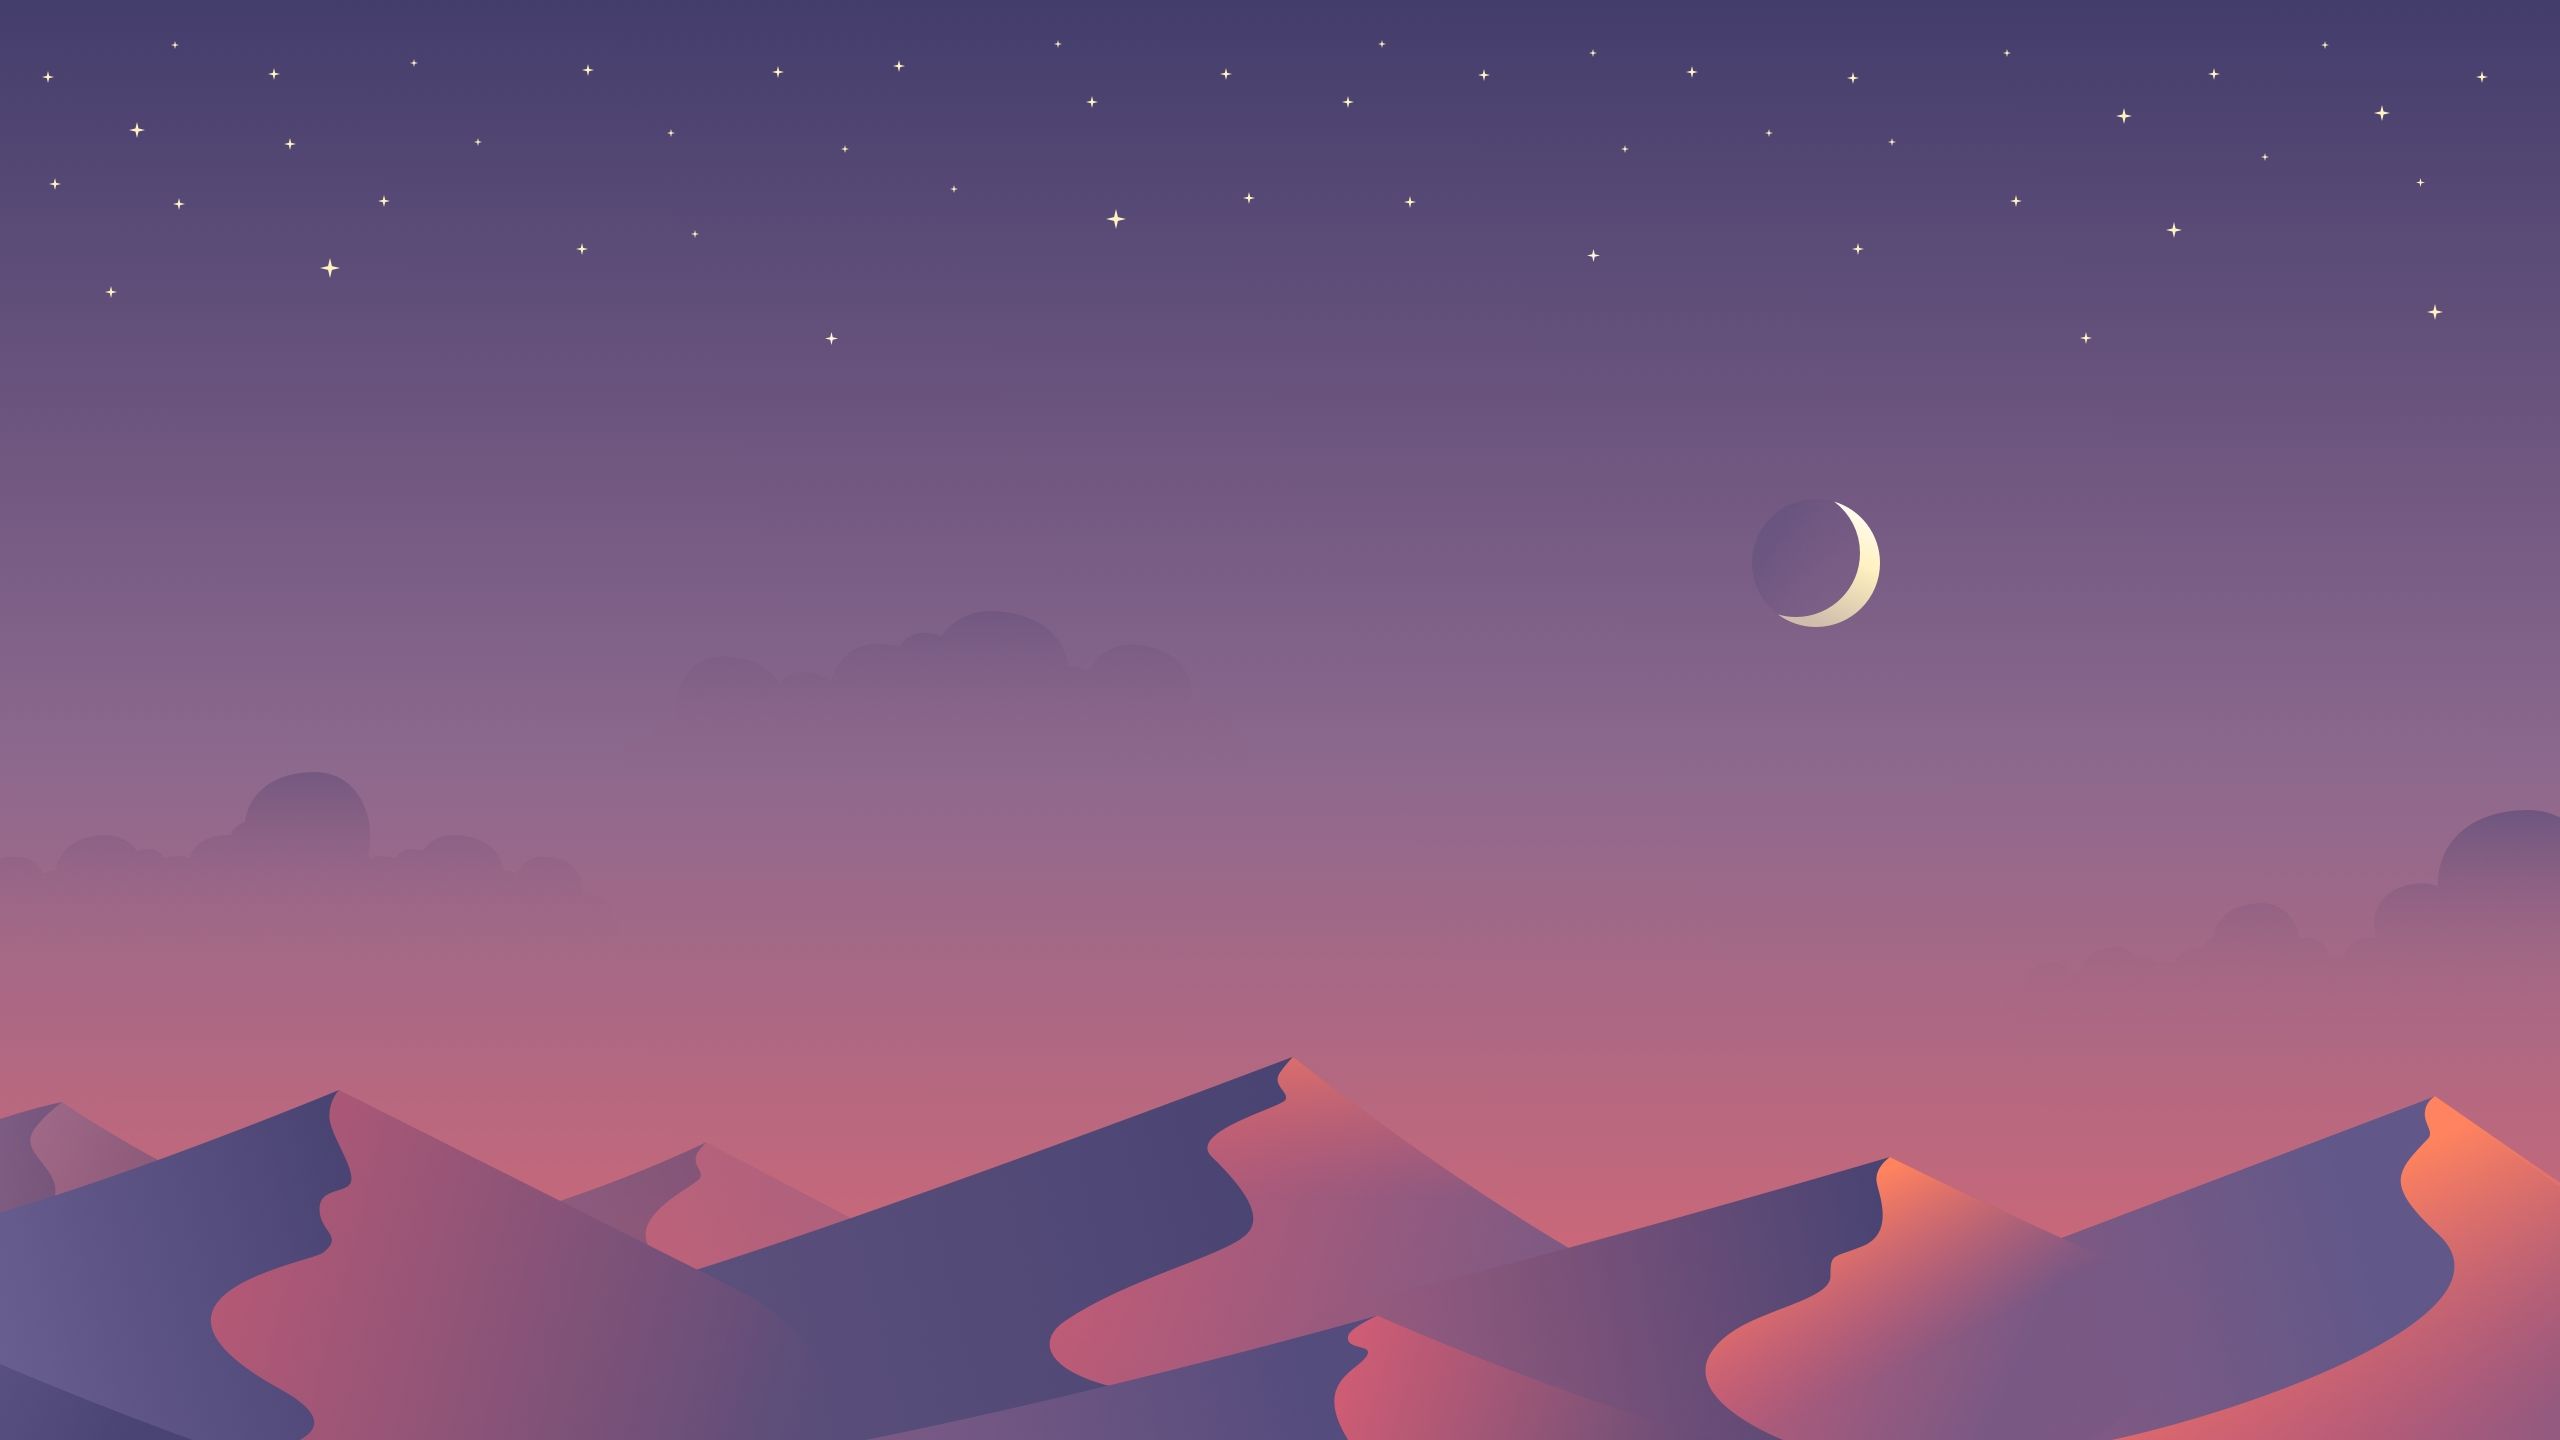 A landscape with mountains and the moon - 2560x1440, profile picture